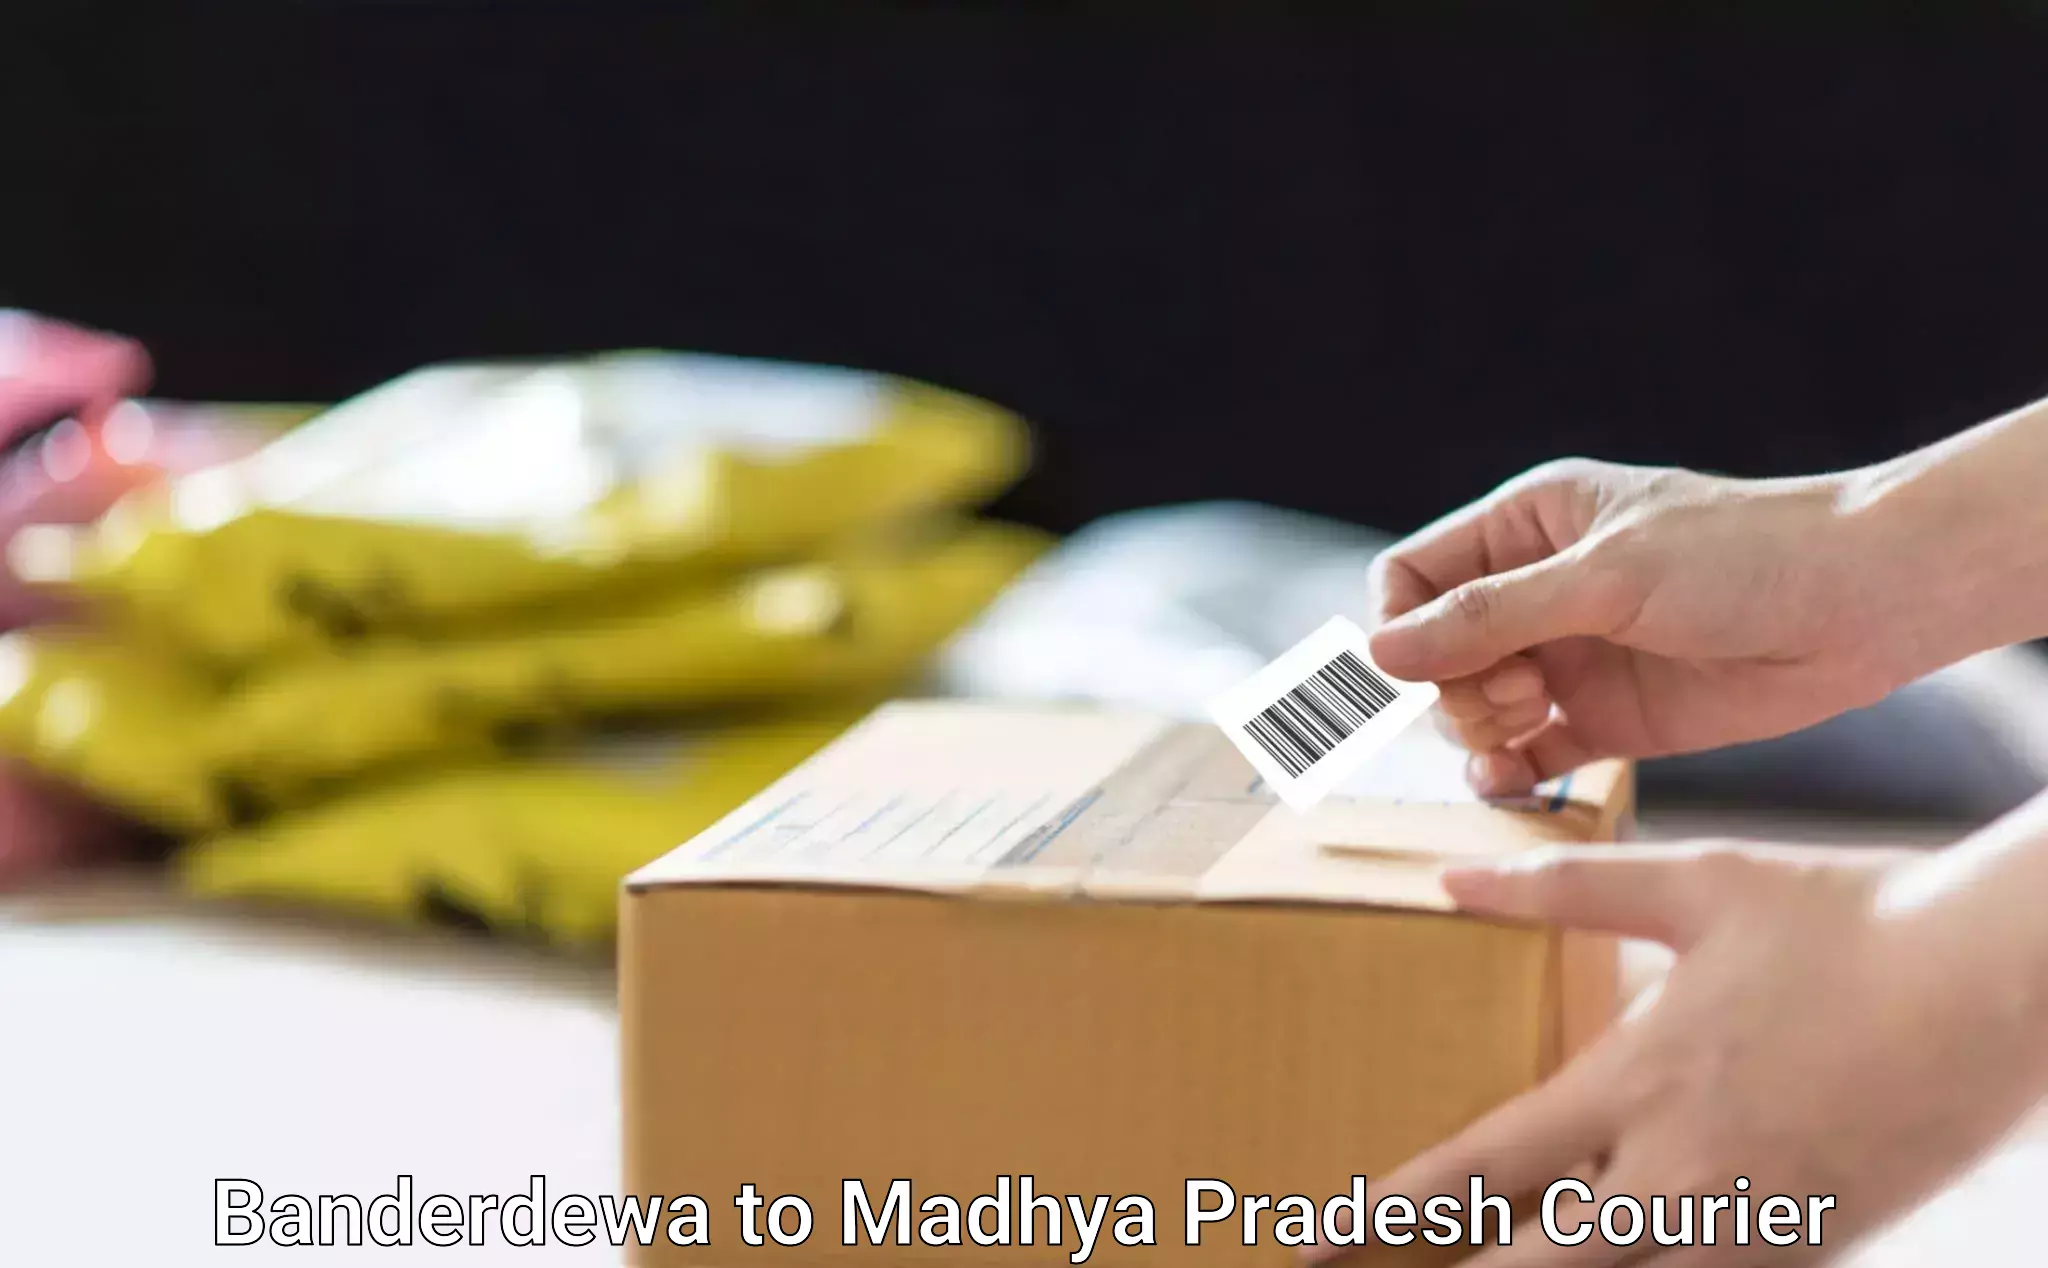 Same-day delivery options in Banderdewa to Nalkheda